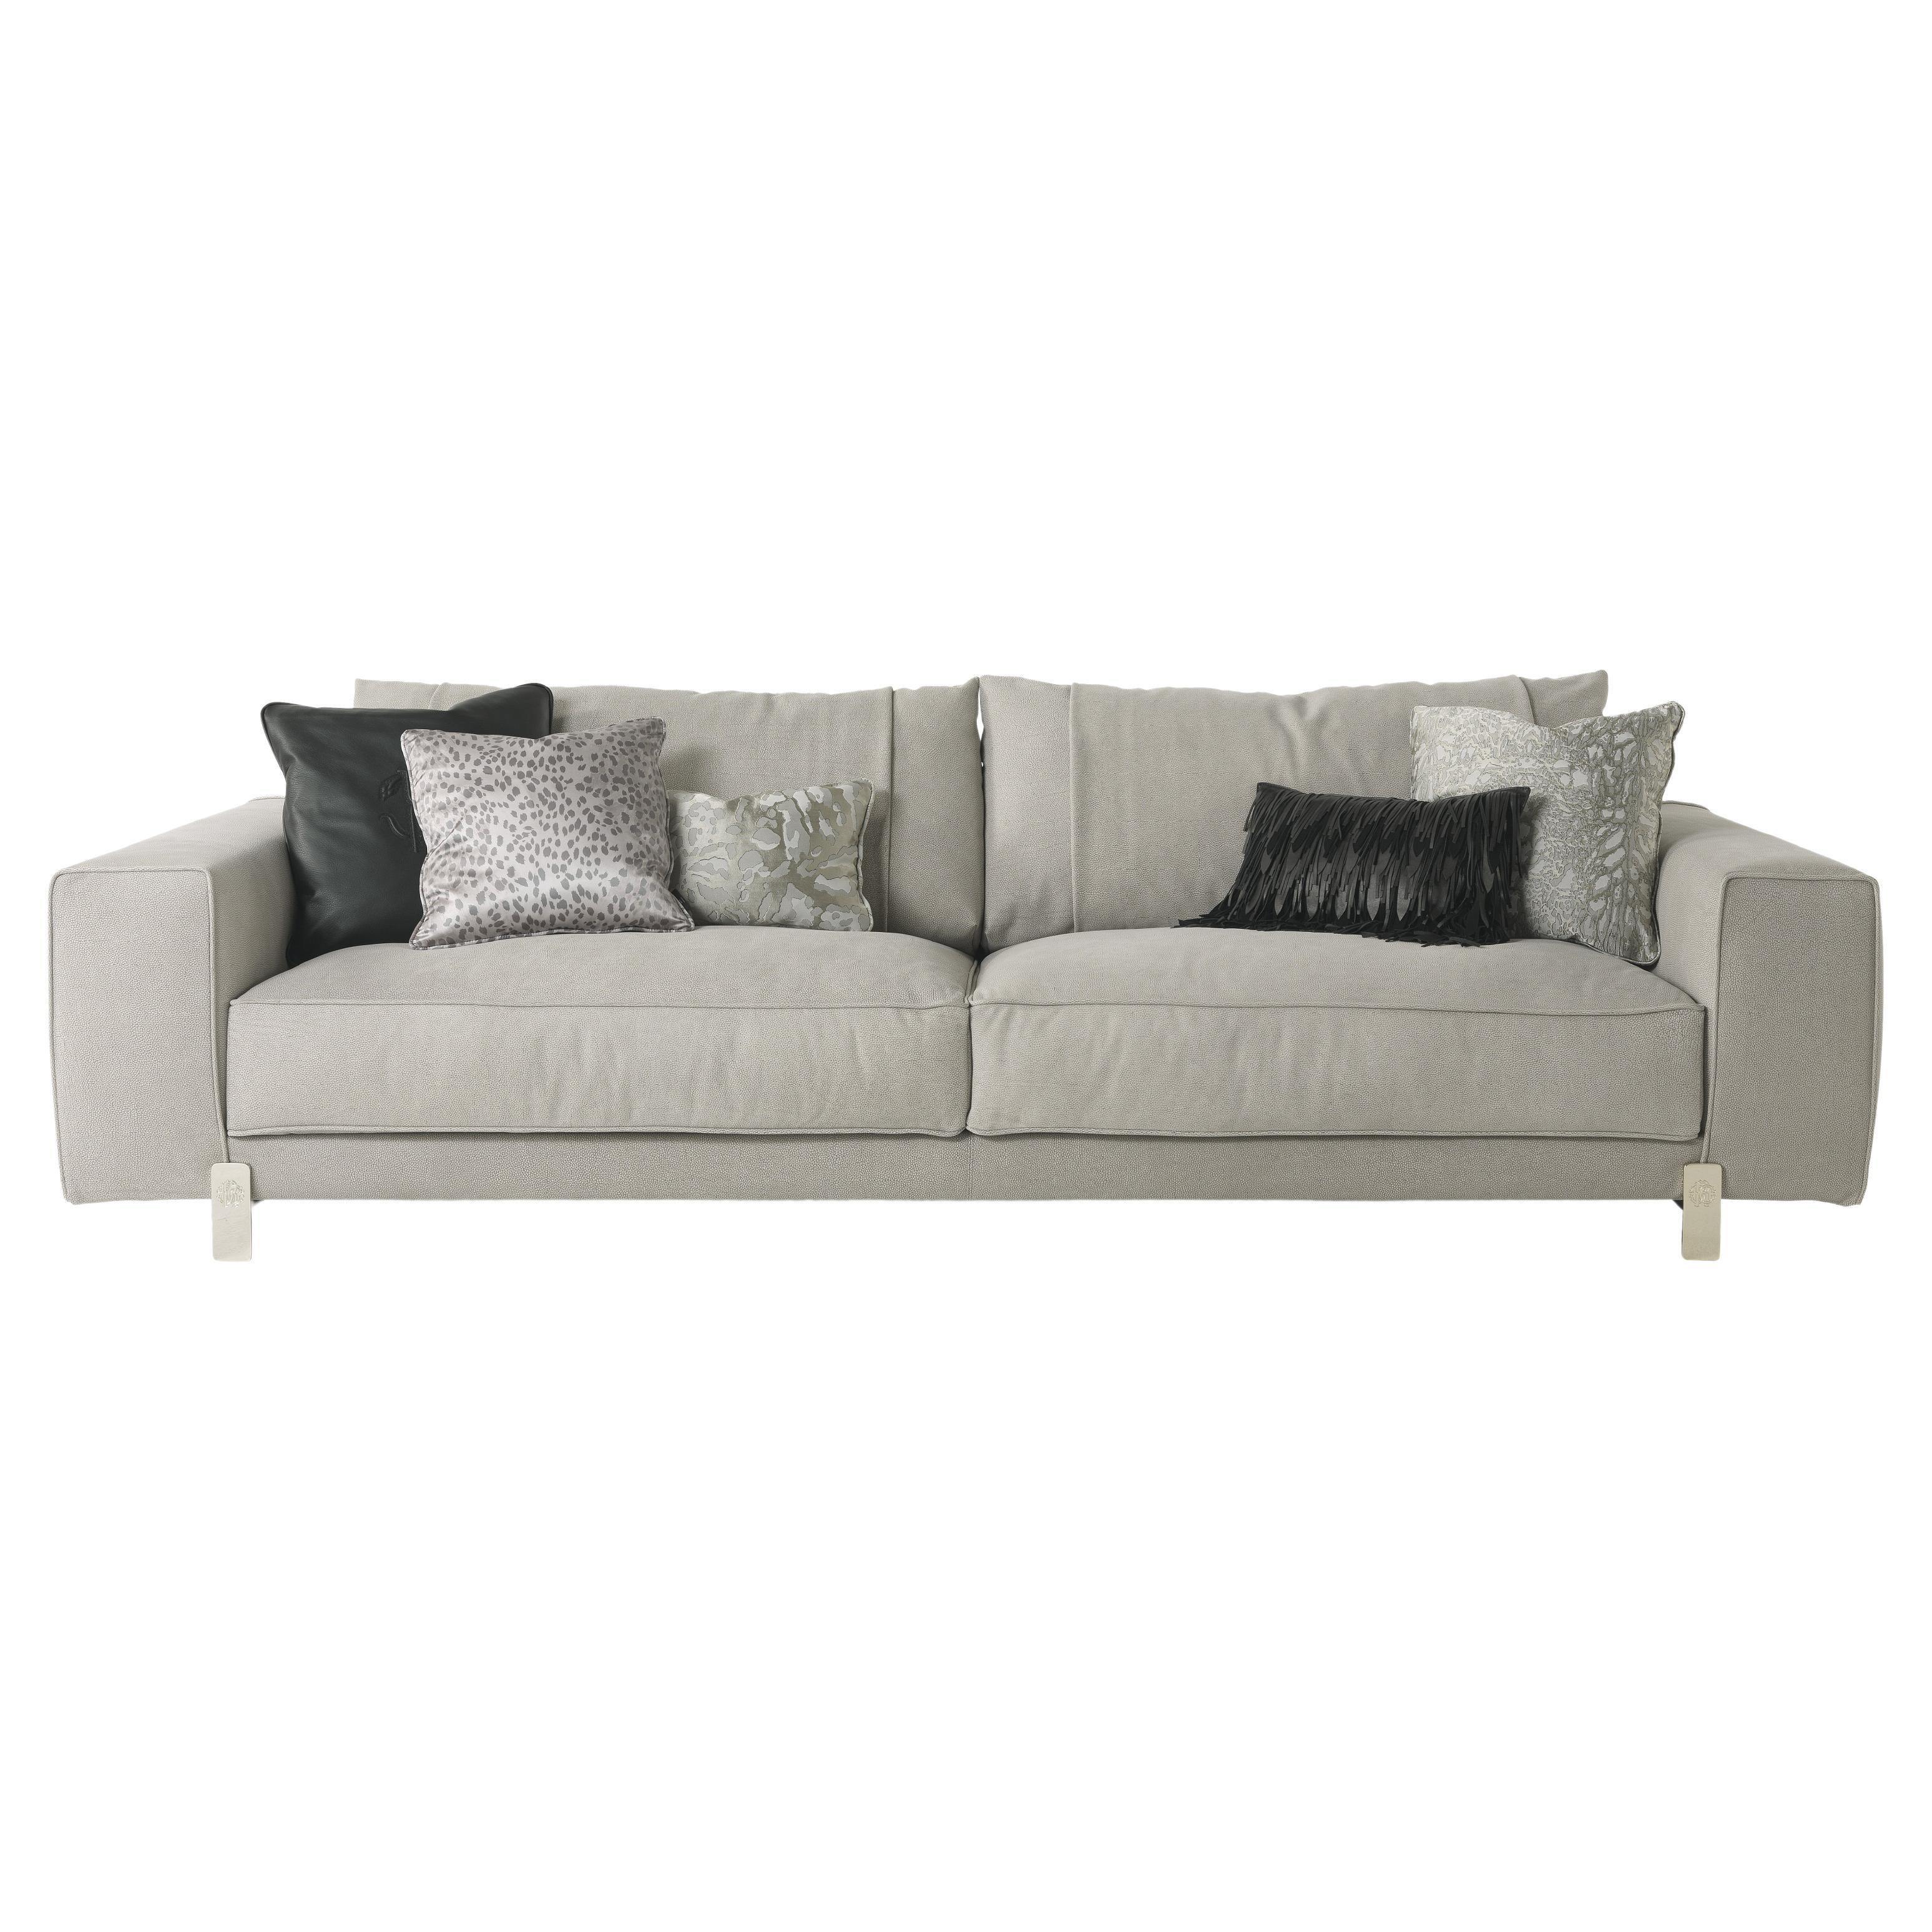 21st Century Caicos 3-Seater Sofa in Leather by Roberto Cavalli Home Interiors 